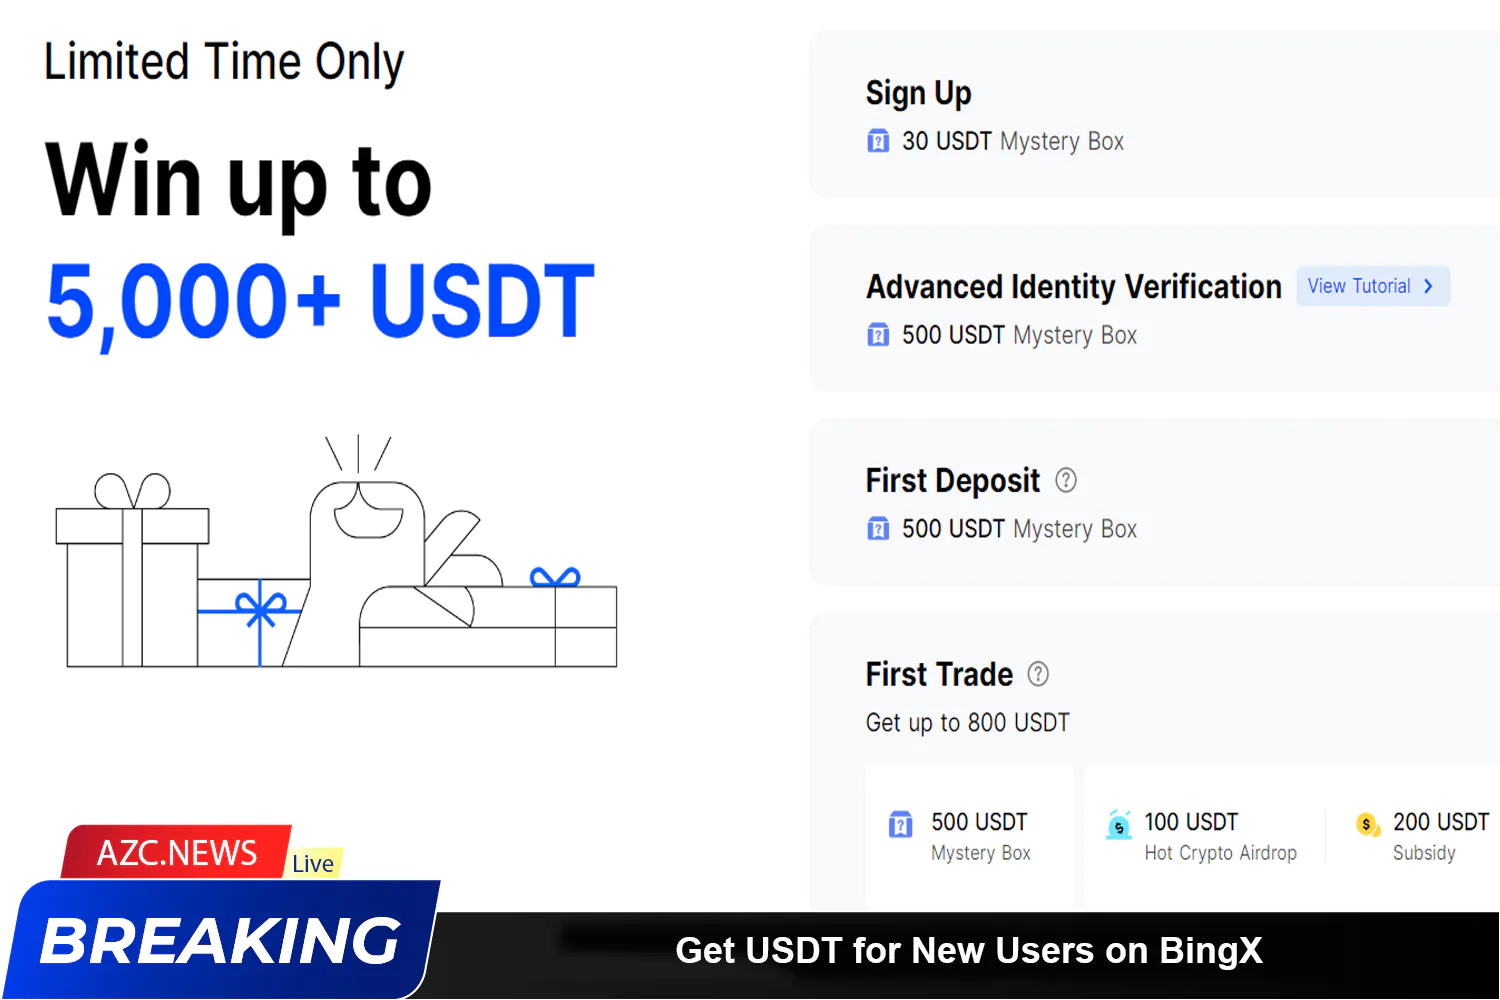 Get Usdt For New Users On Bingx